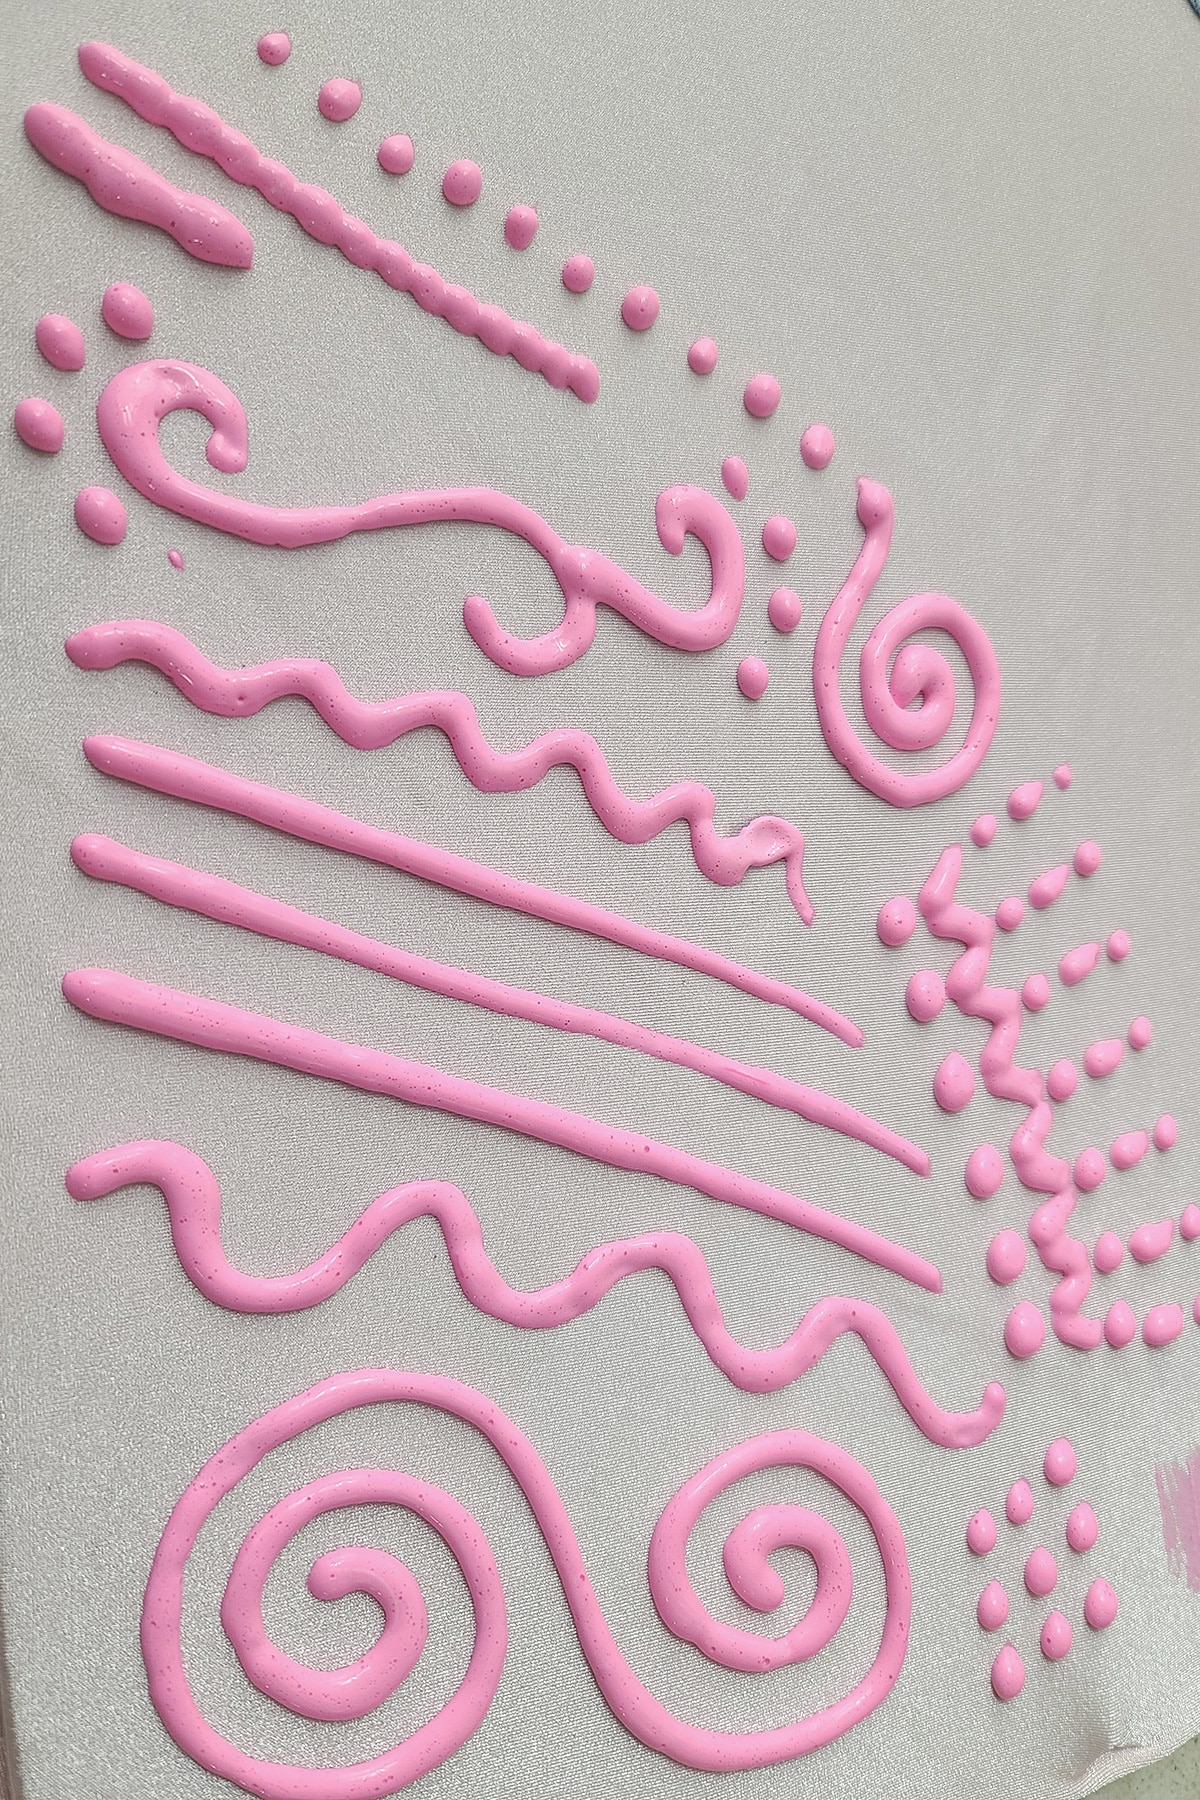 Various lines, squiggles, and swirls of neon pink stretch paint on a piece of light pink spandex.